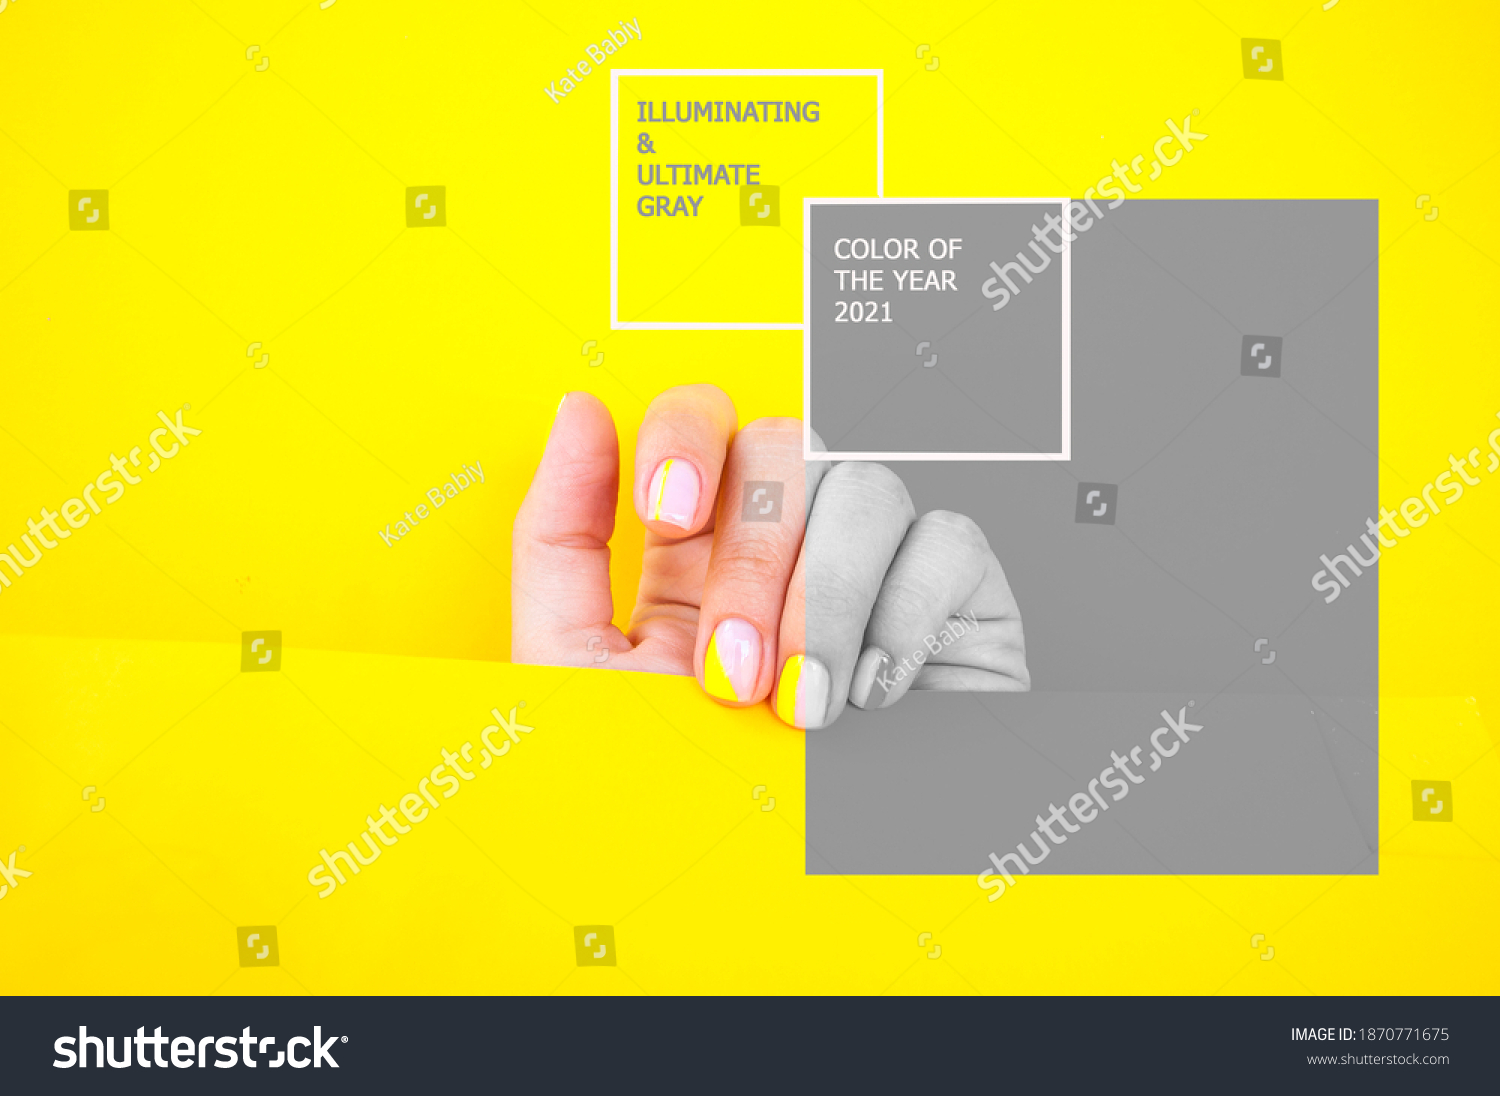 Young woman's hand with beautiful manicure on illuminating yellow and gray color background holding bright yellow paper. Color 2021. #1870771675